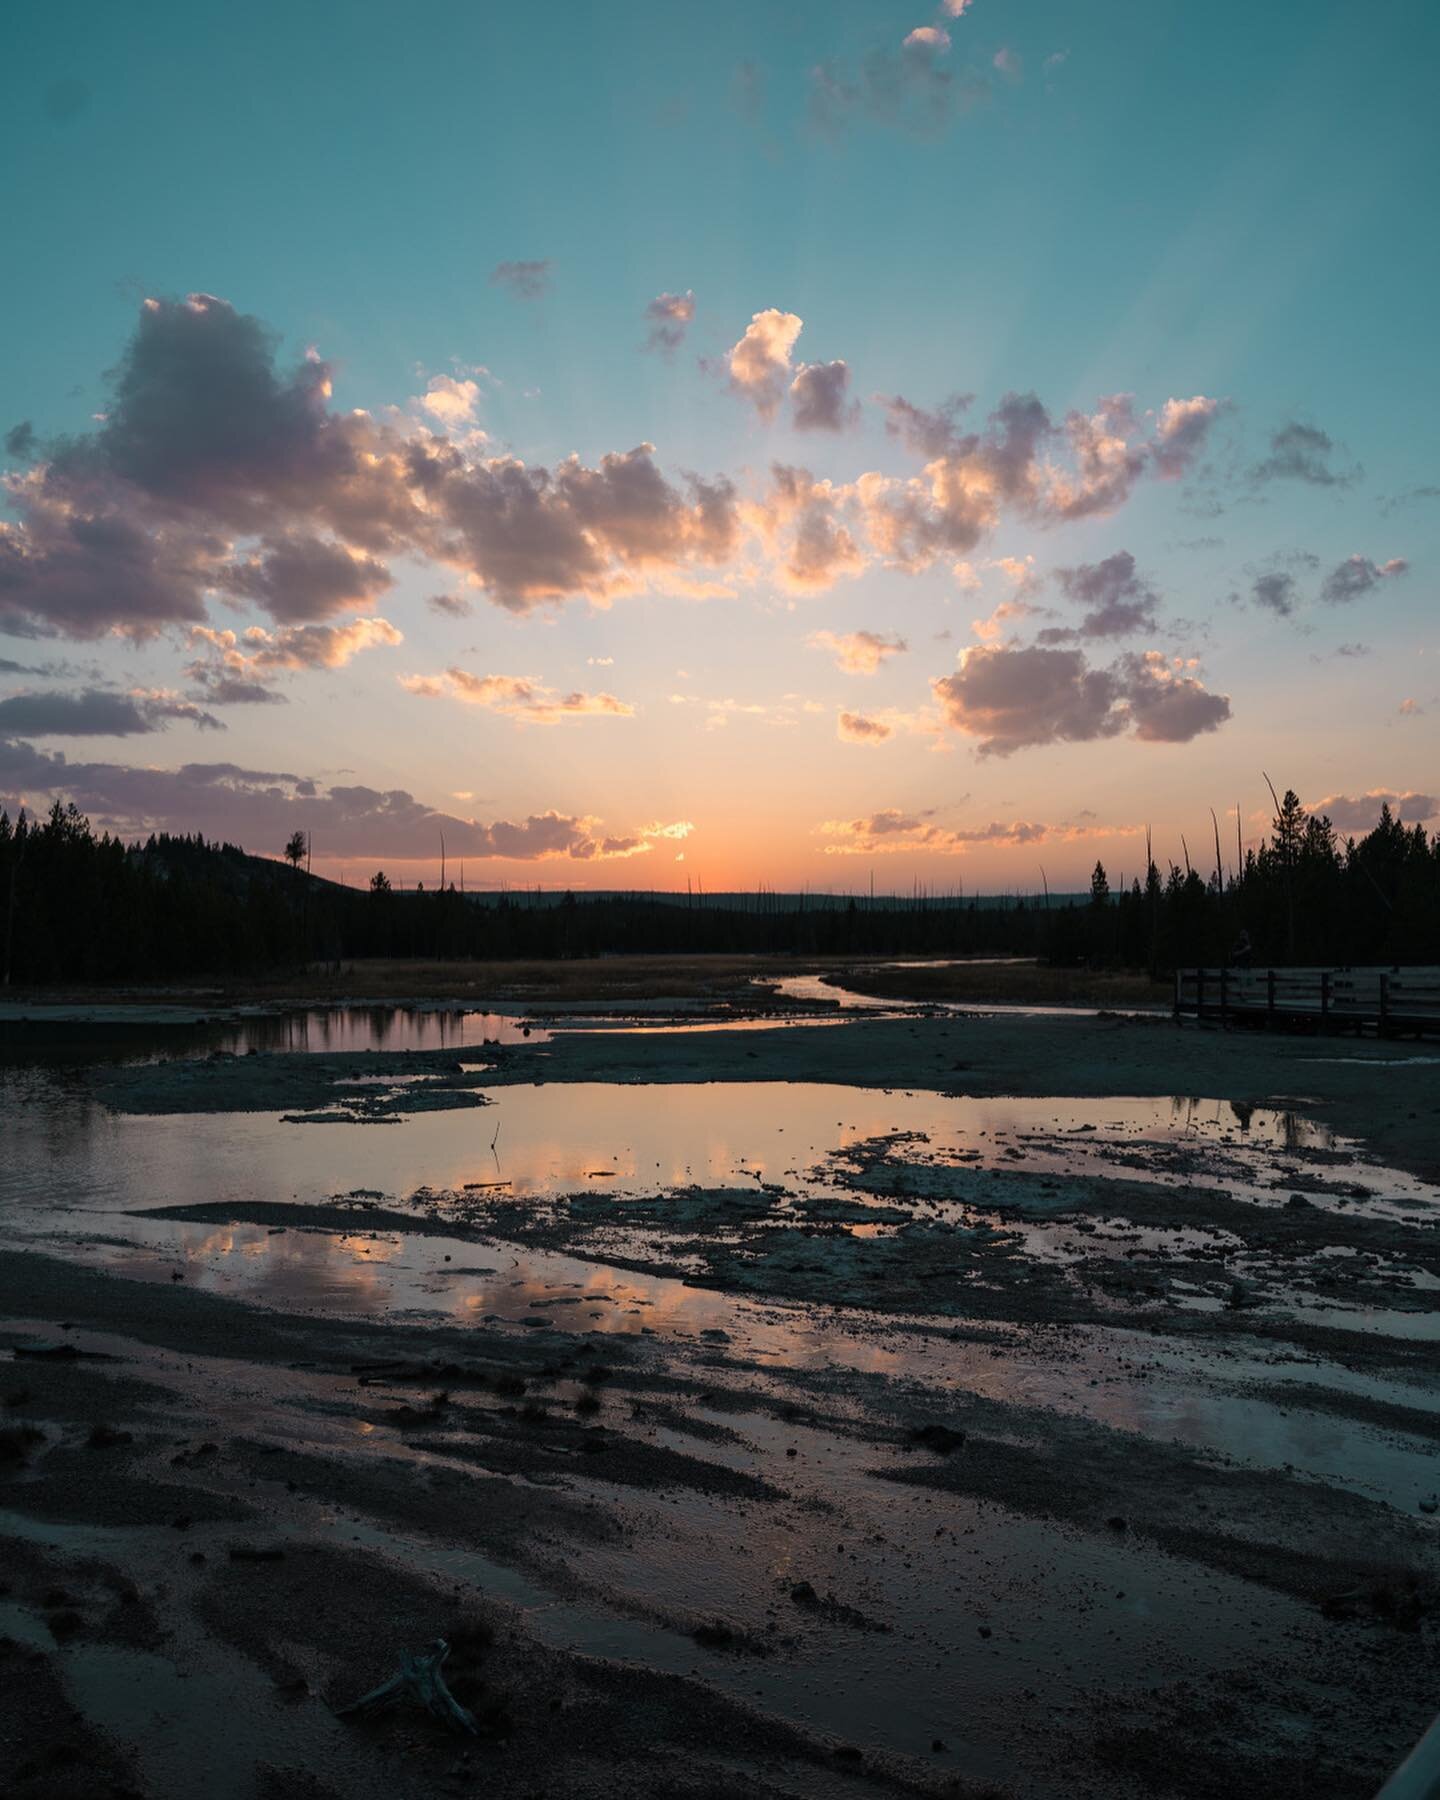 𝘛𝘩𝘪𝘴. 𝘑𝘶𝘴𝘵 𝘭𝘰𝘰𝘬 𝘢𝘵 𝘵𝘩𝘪𝘴. 🌅
We couldn&rsquo;t have asked for a better end to our first day in Yellowstone. It was also nice to learn that if you don&rsquo;t mind being out until sunset, it&rsquo;s really a great way to see some of t